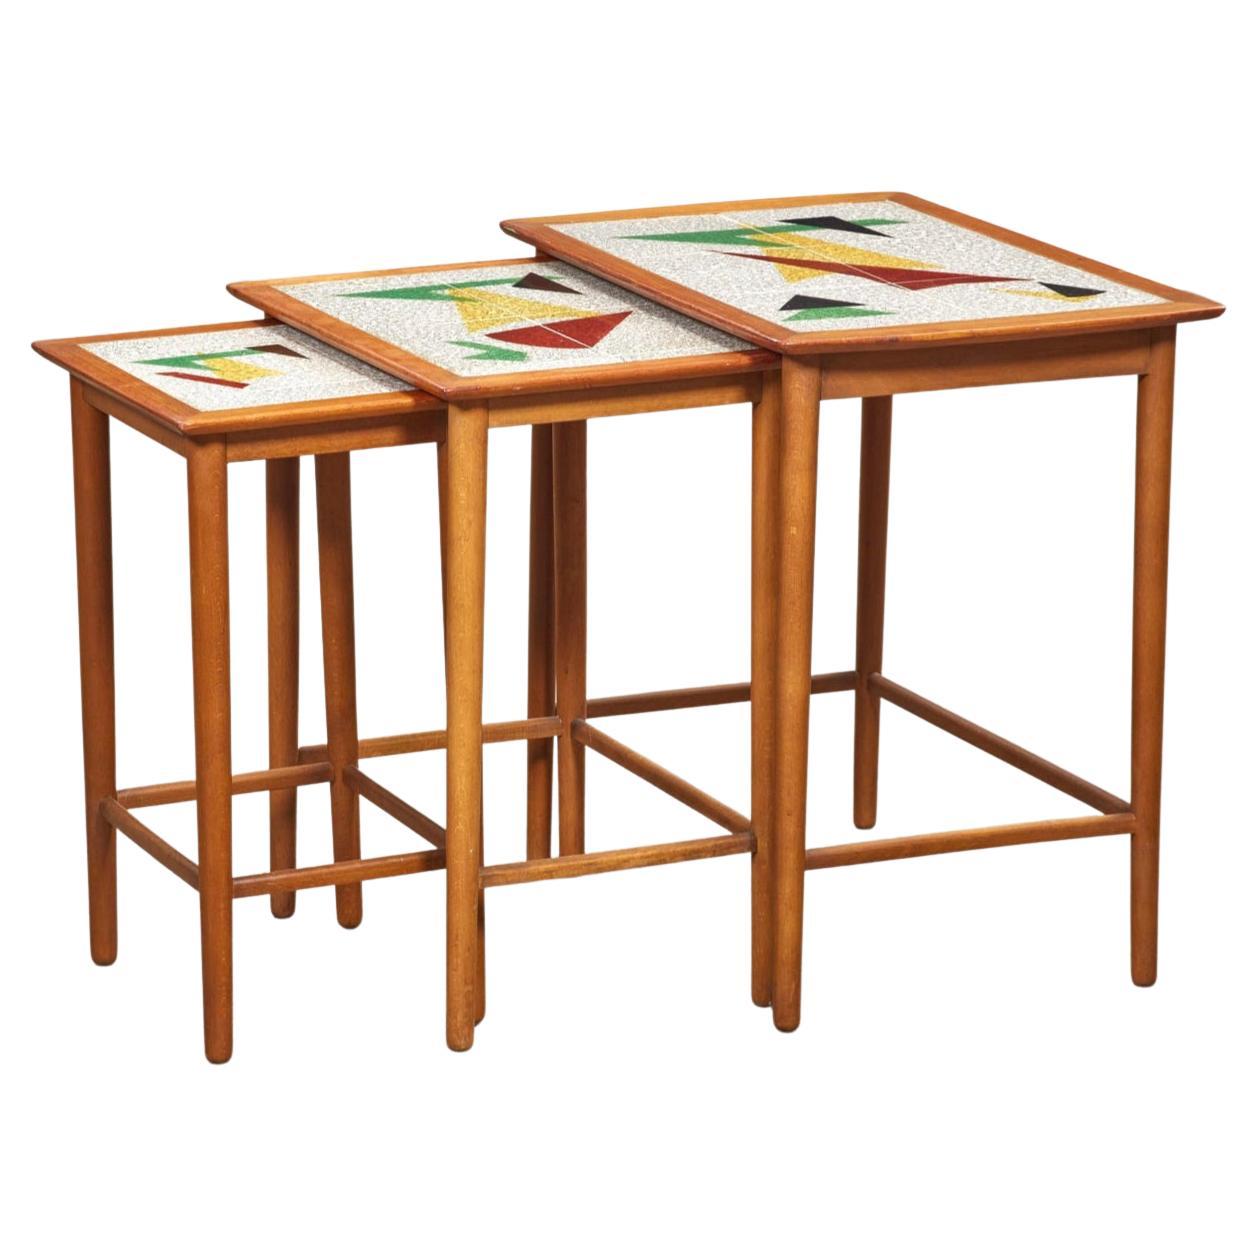 Set of 3 MCM Danish Teak and Tile Inlay Nesting Tables, 1960s